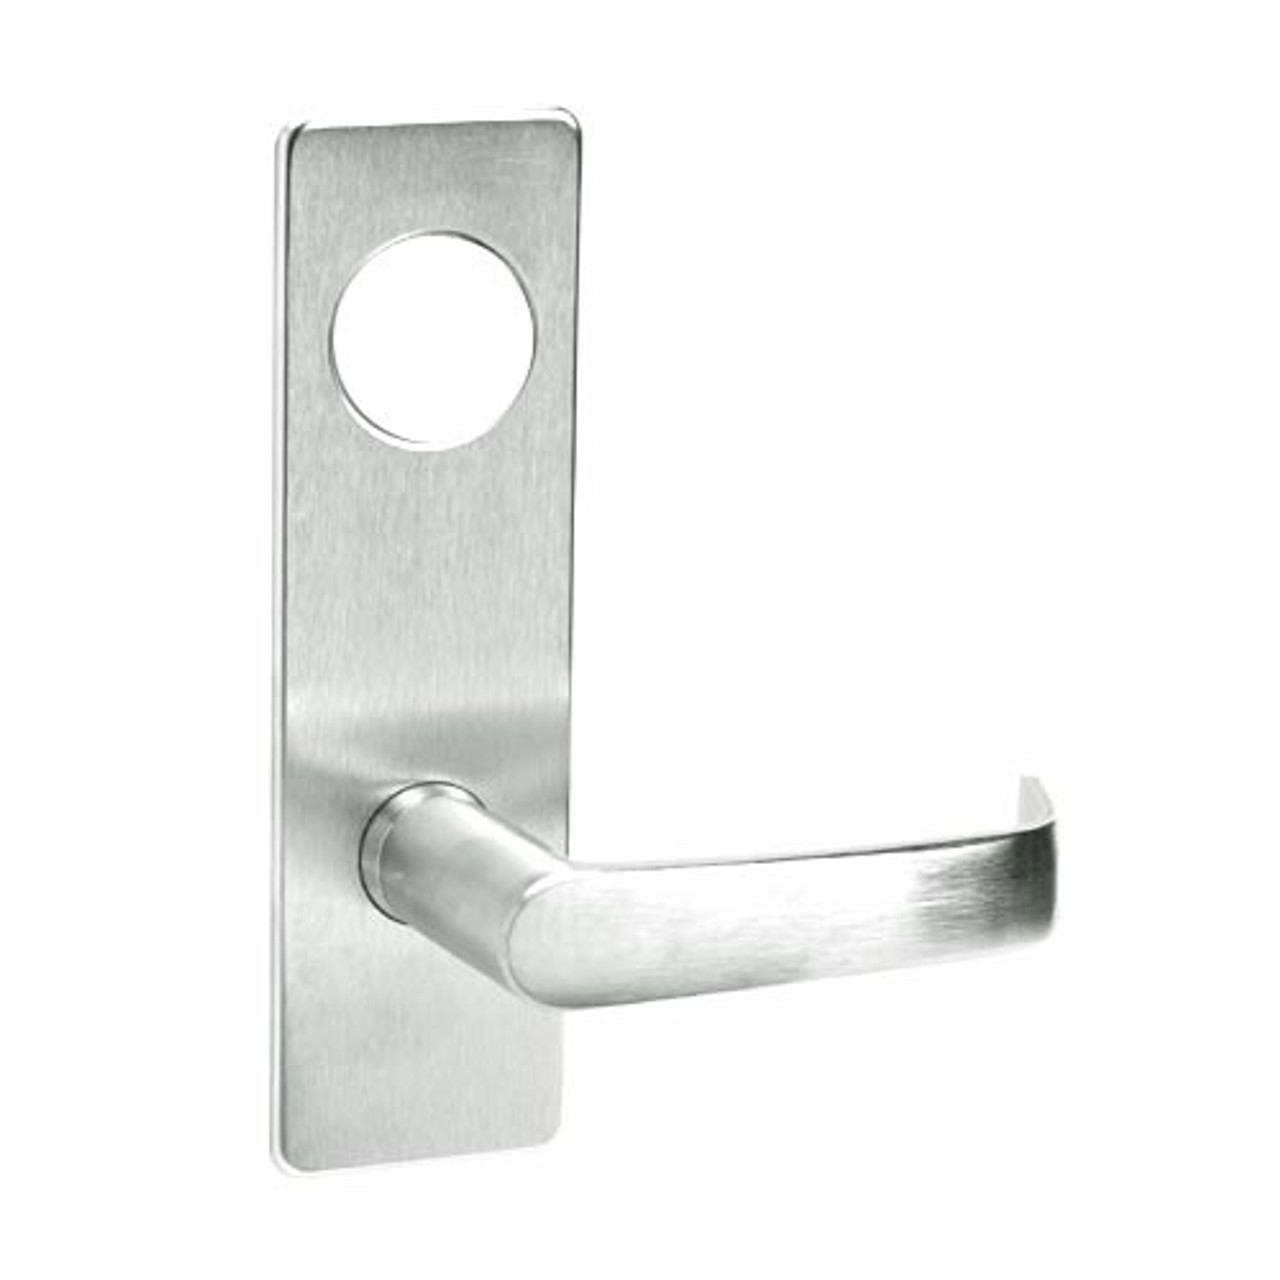 ML2053-NSR-618-CL7 Corbin Russwin ML2000 Series IC 7-Pin Less Core Mortise Entrance Locksets with Newport Lever in Bright Nickel